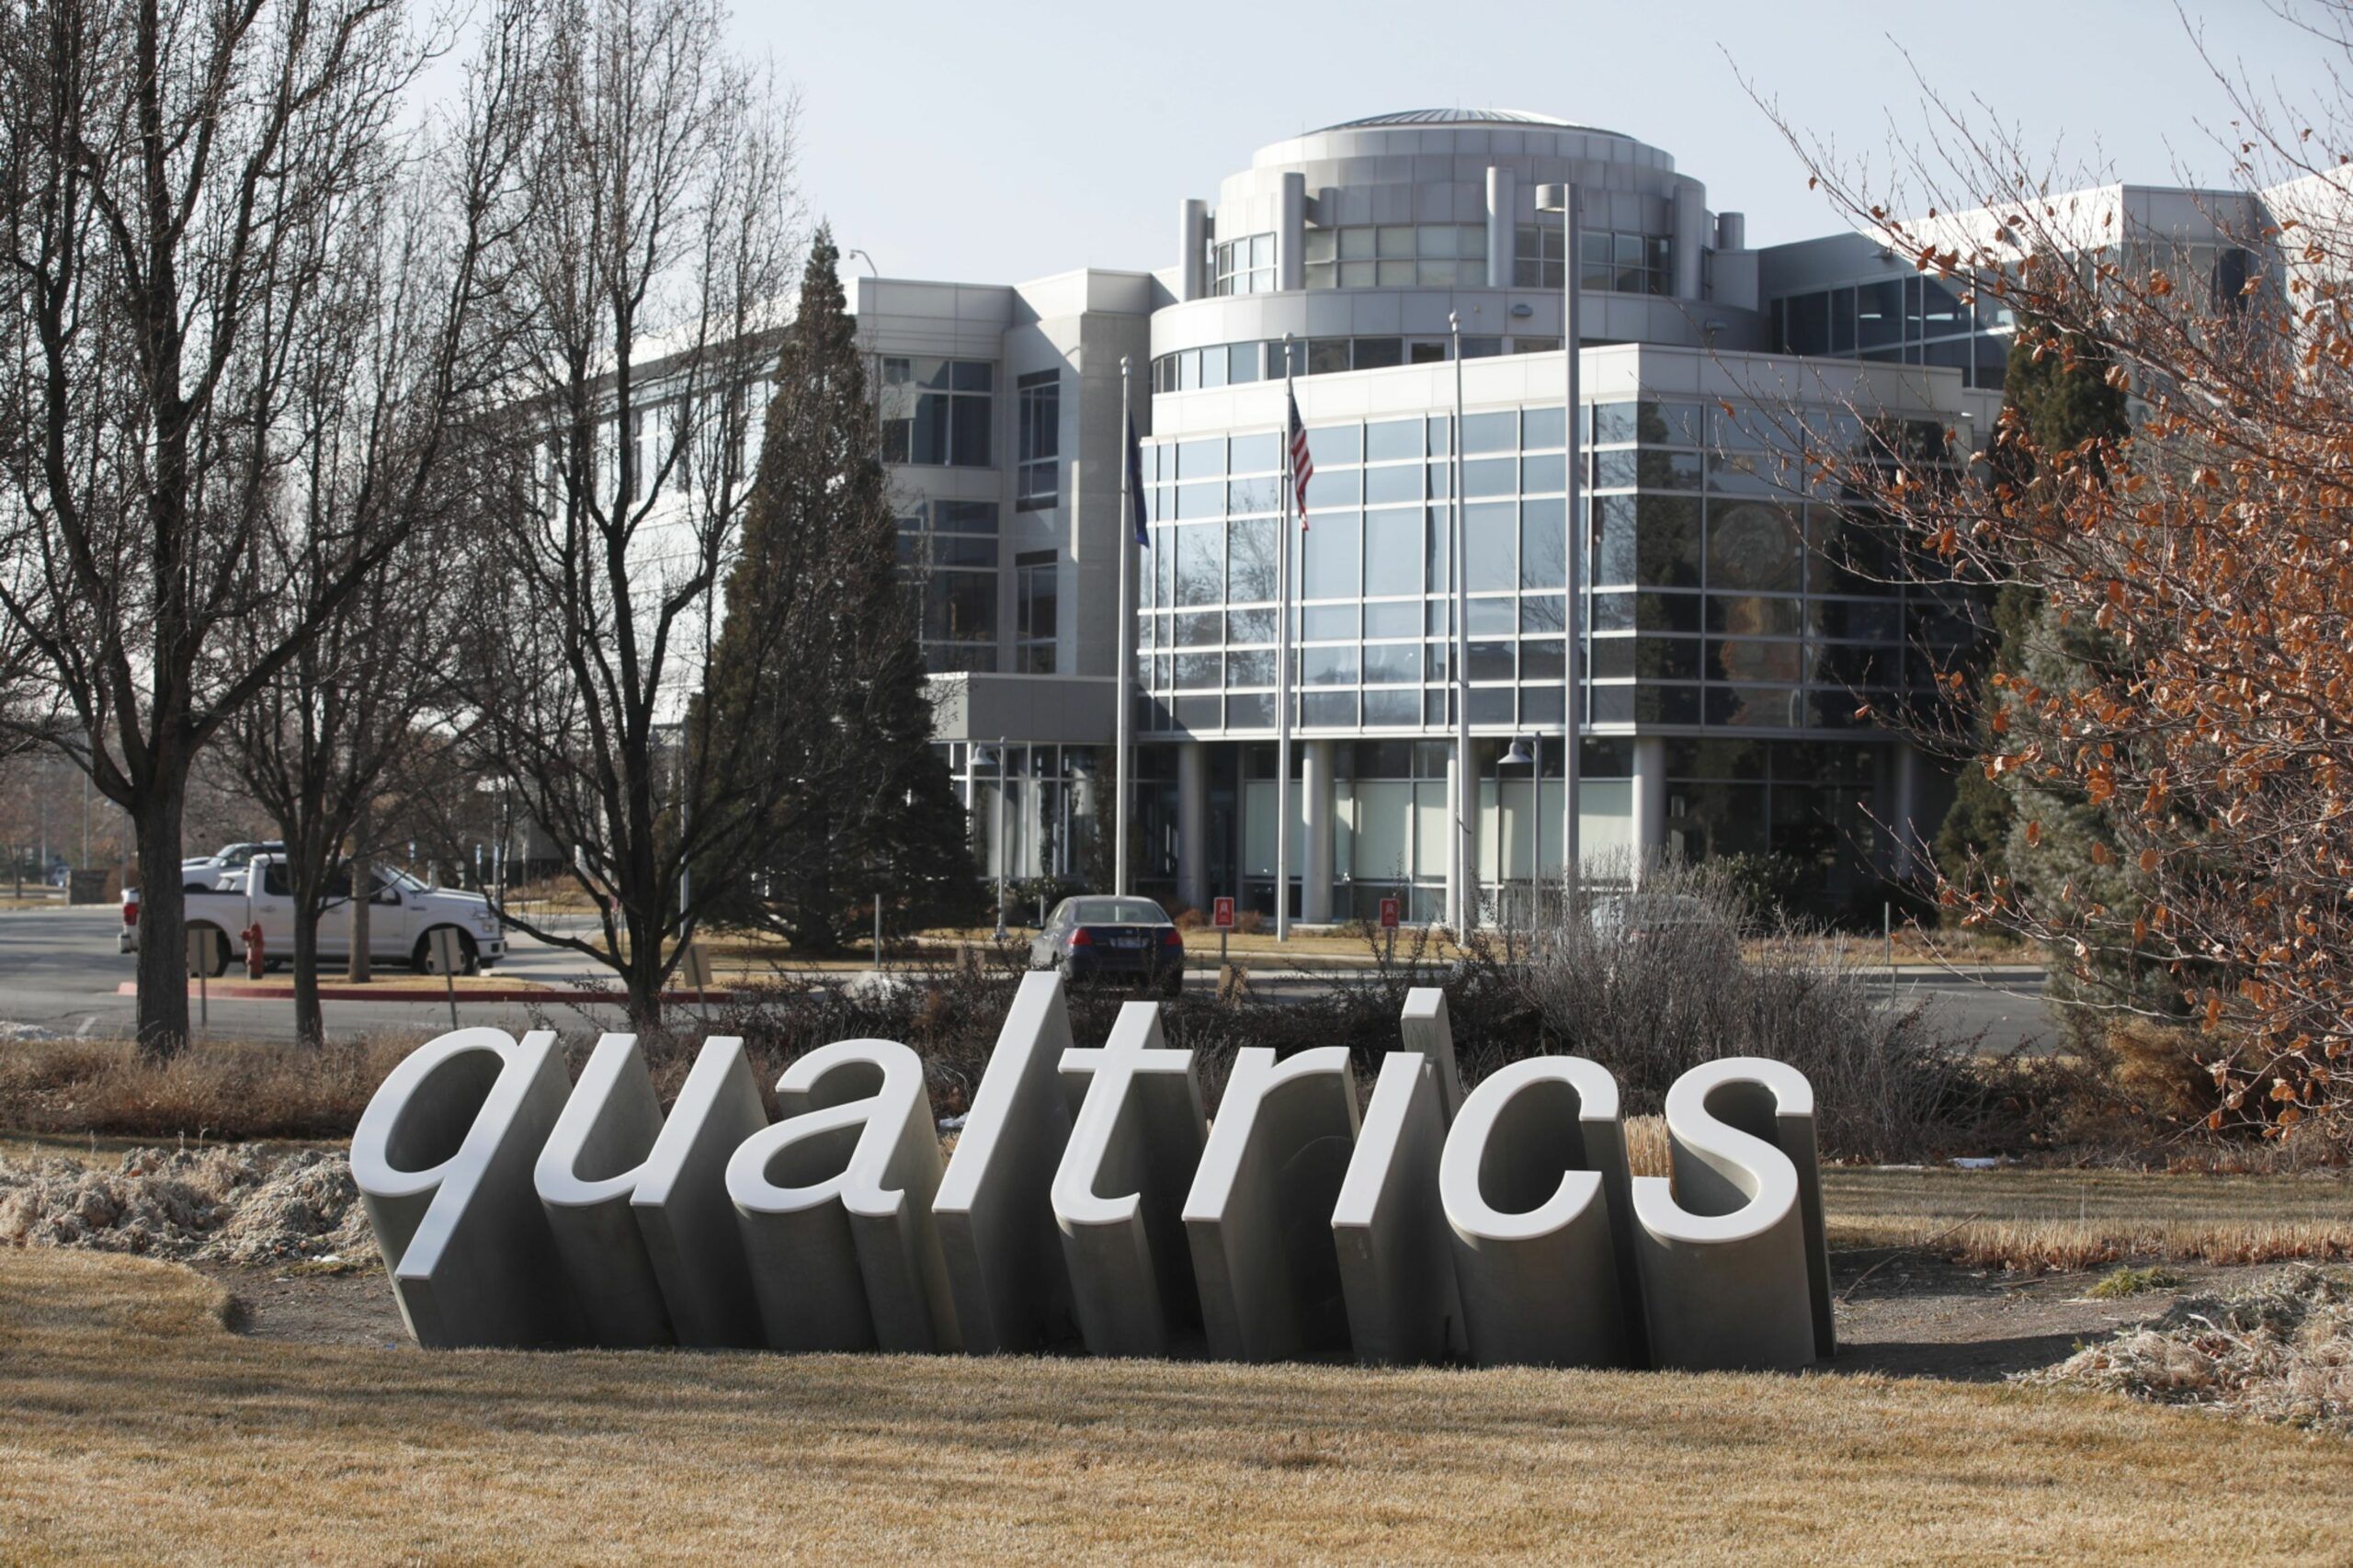 Signage in front of Qualtrics International Inc. headquarters in Provo, Utah, U.S., on Monday, Jan. 11, 2021. Qualtrics International Inc. filed for what could be one of the first U.S. initial public offerings of 2021, just over two years after it was acquired by German software giant SAP SE. Photographer: George Frey/Bloomberg